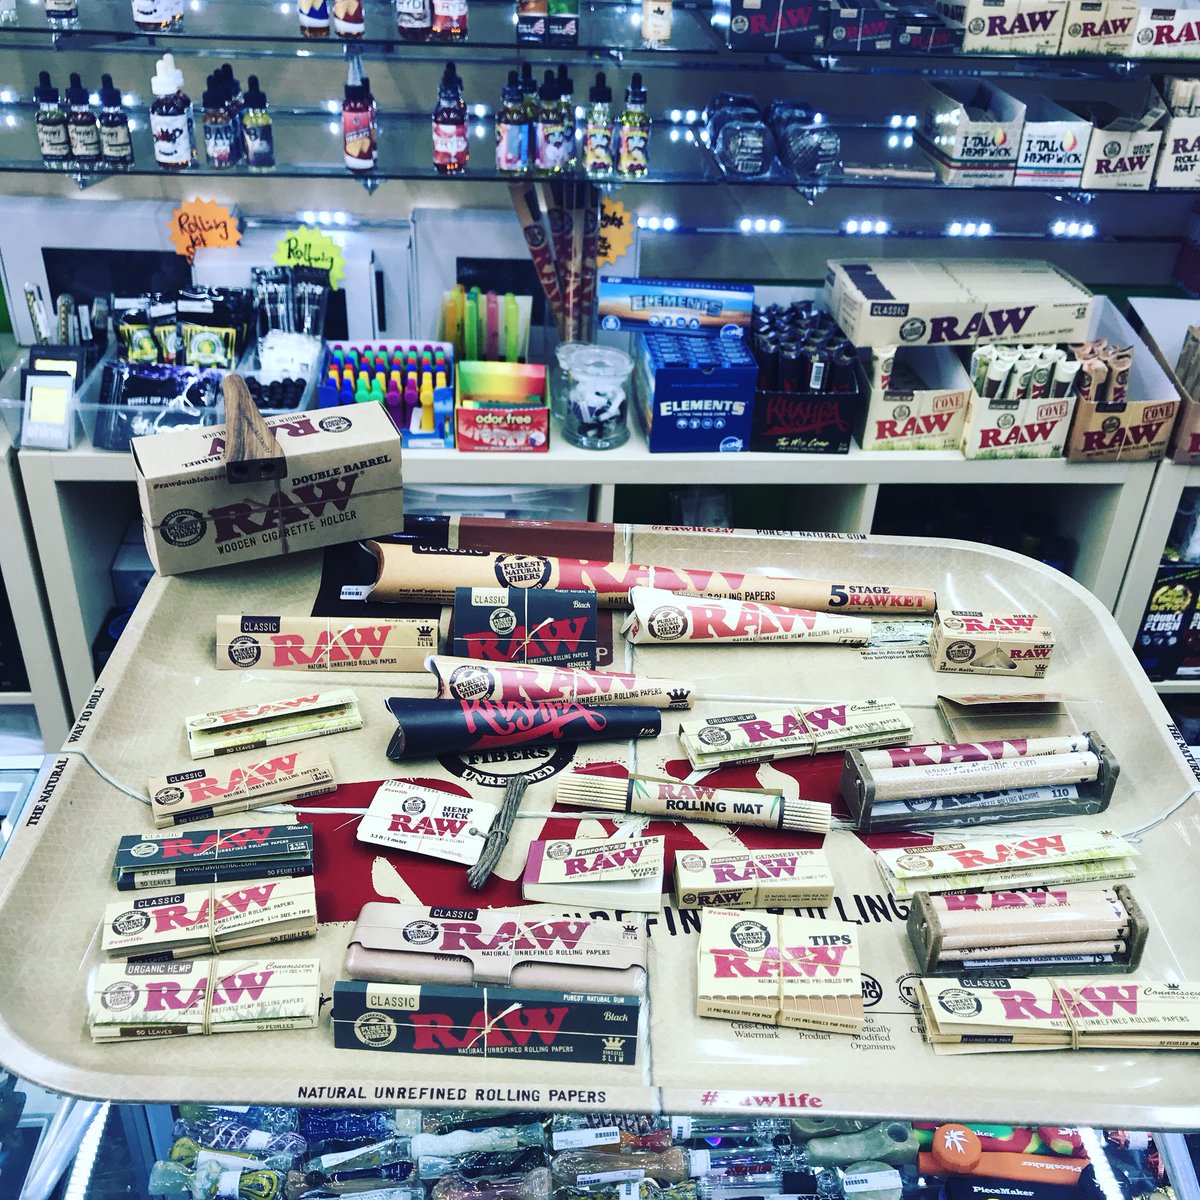 Need papers come check out our amazing extended collection of #rawpapers 👍🏼💯 #rawlife #calle8 #calle8miami #worldofsmokenvapecalle8 #smokingaccessories #waterpipes #bestsmokingselection #bubblers #bestsmokingbrands #chilling #ilovesmoke #smoking #smokinggadgets #420